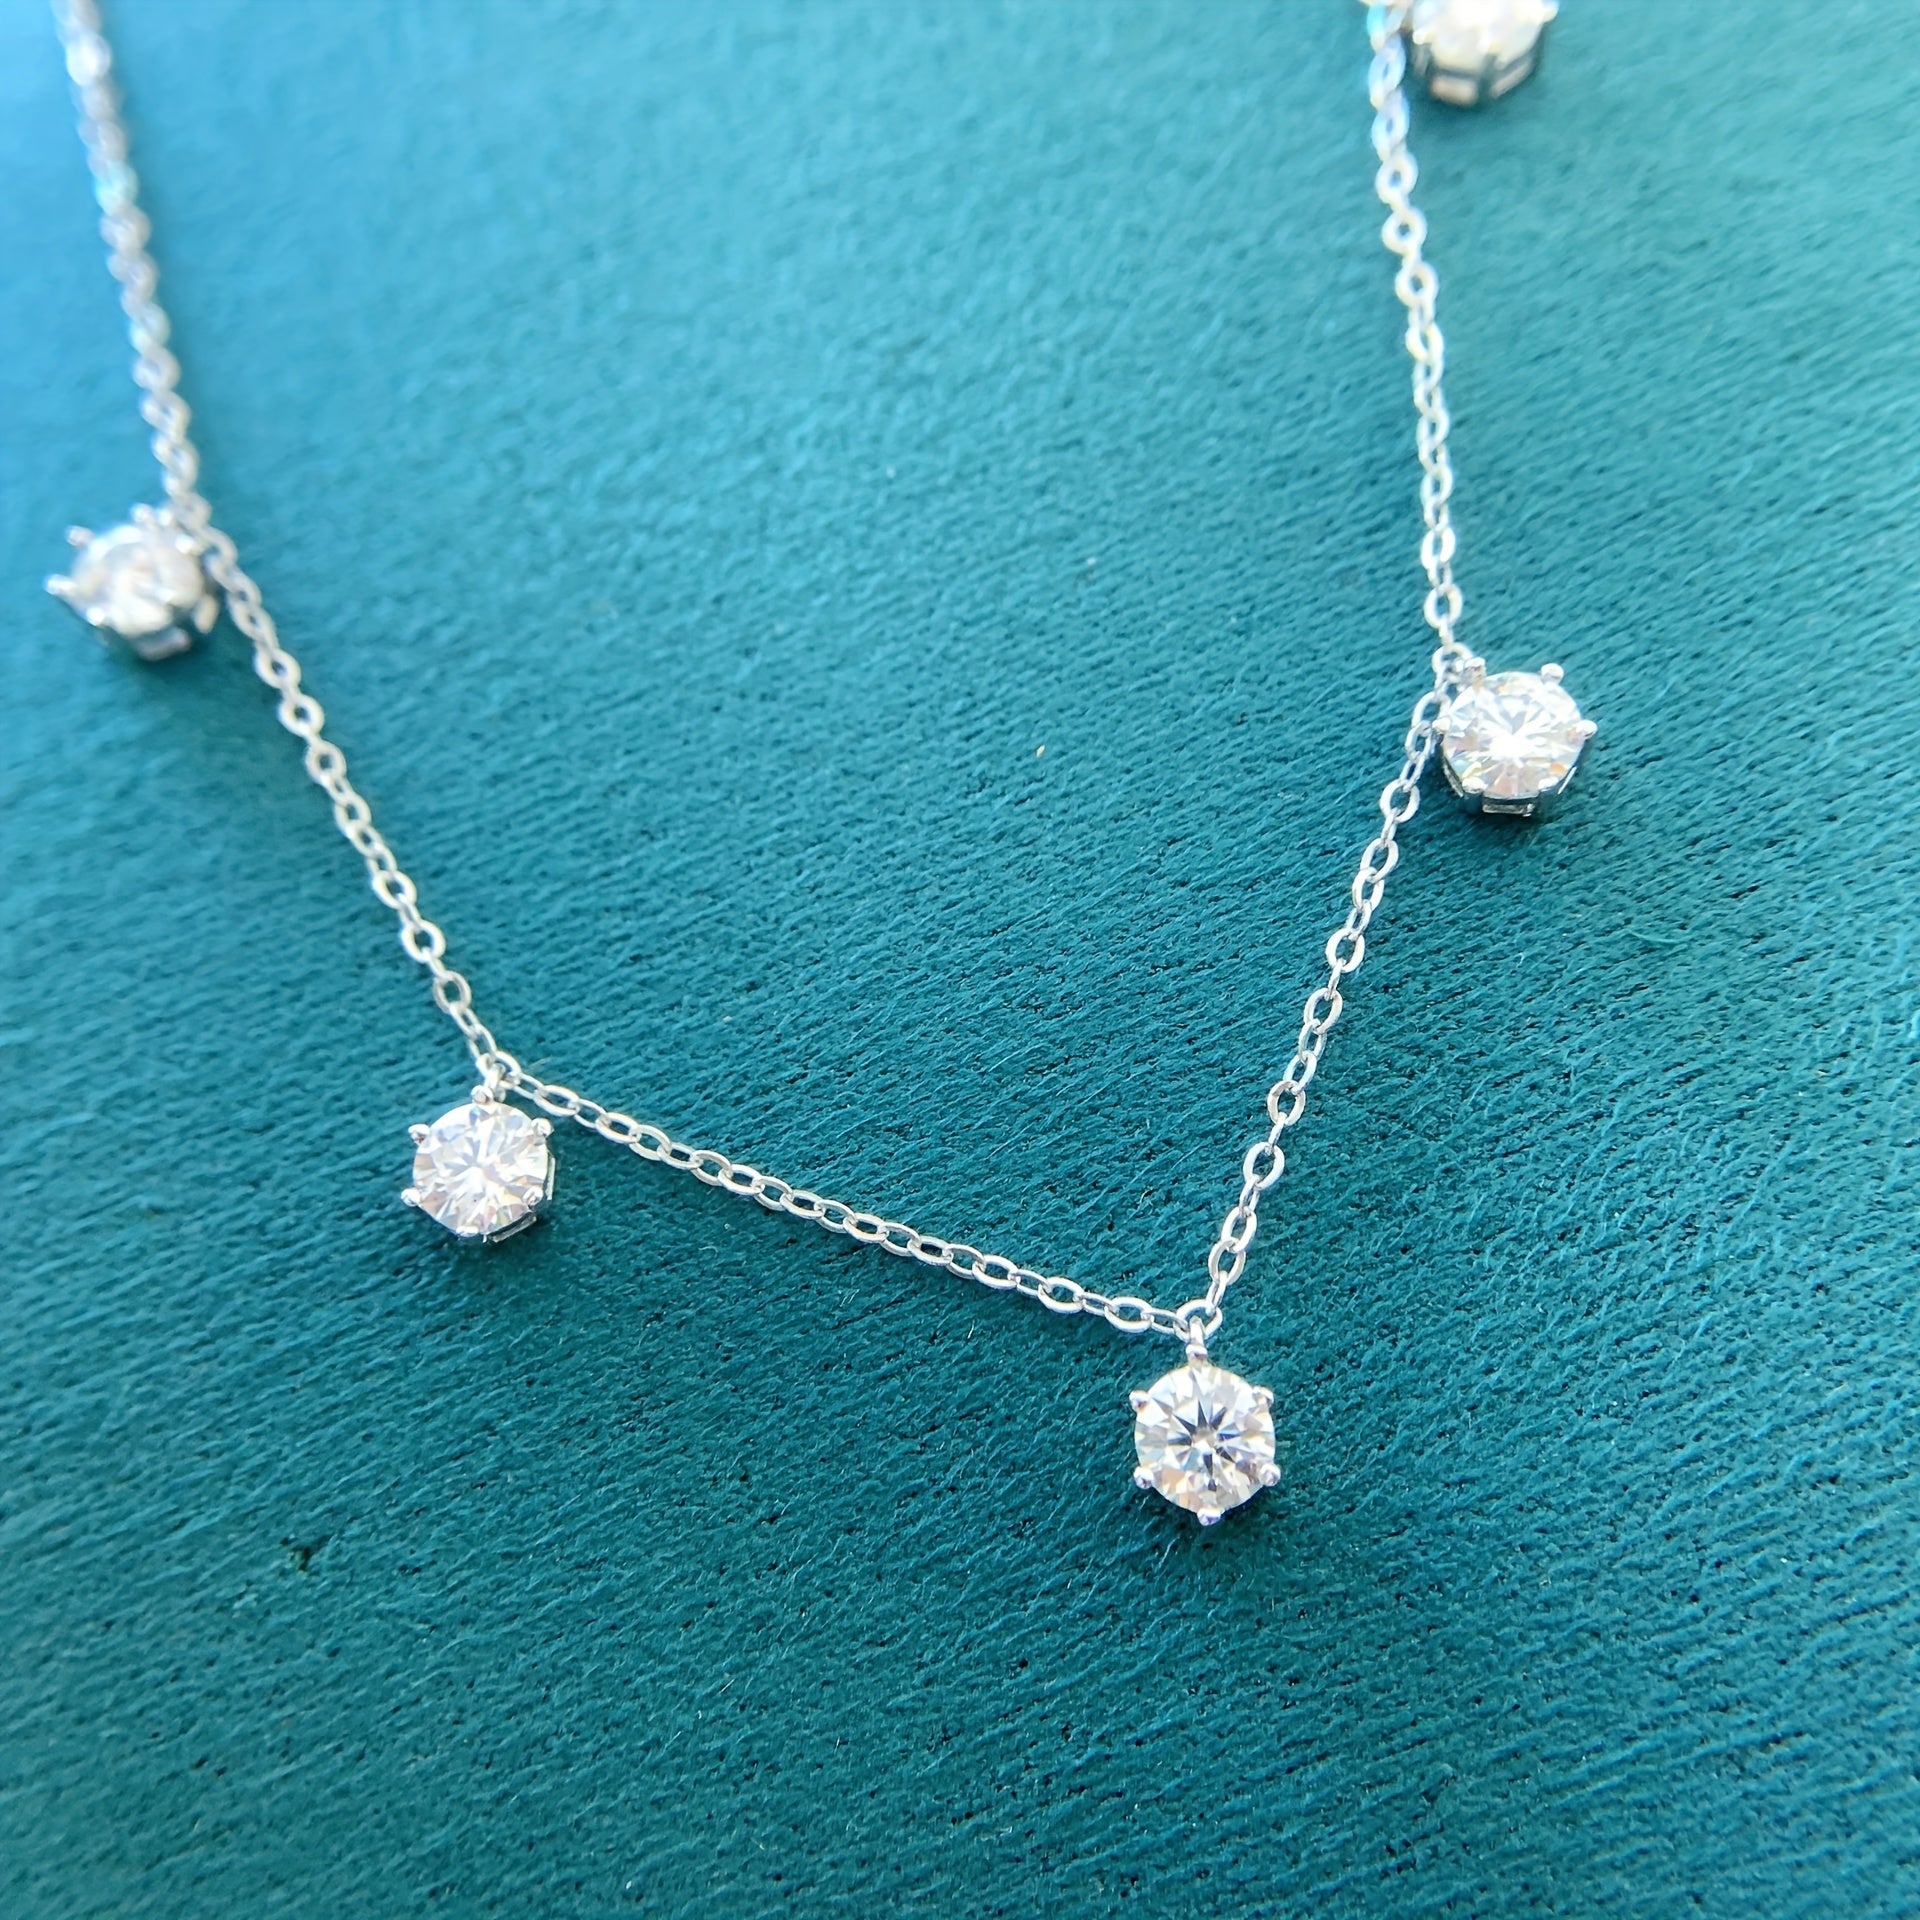 Starry Luxury Necklace - 925 Sterling Silver Moissanite Clavicle Chain for Women, Perfect Gift for Birthday, Anniversary, Proposal, Engagement, and Wedding